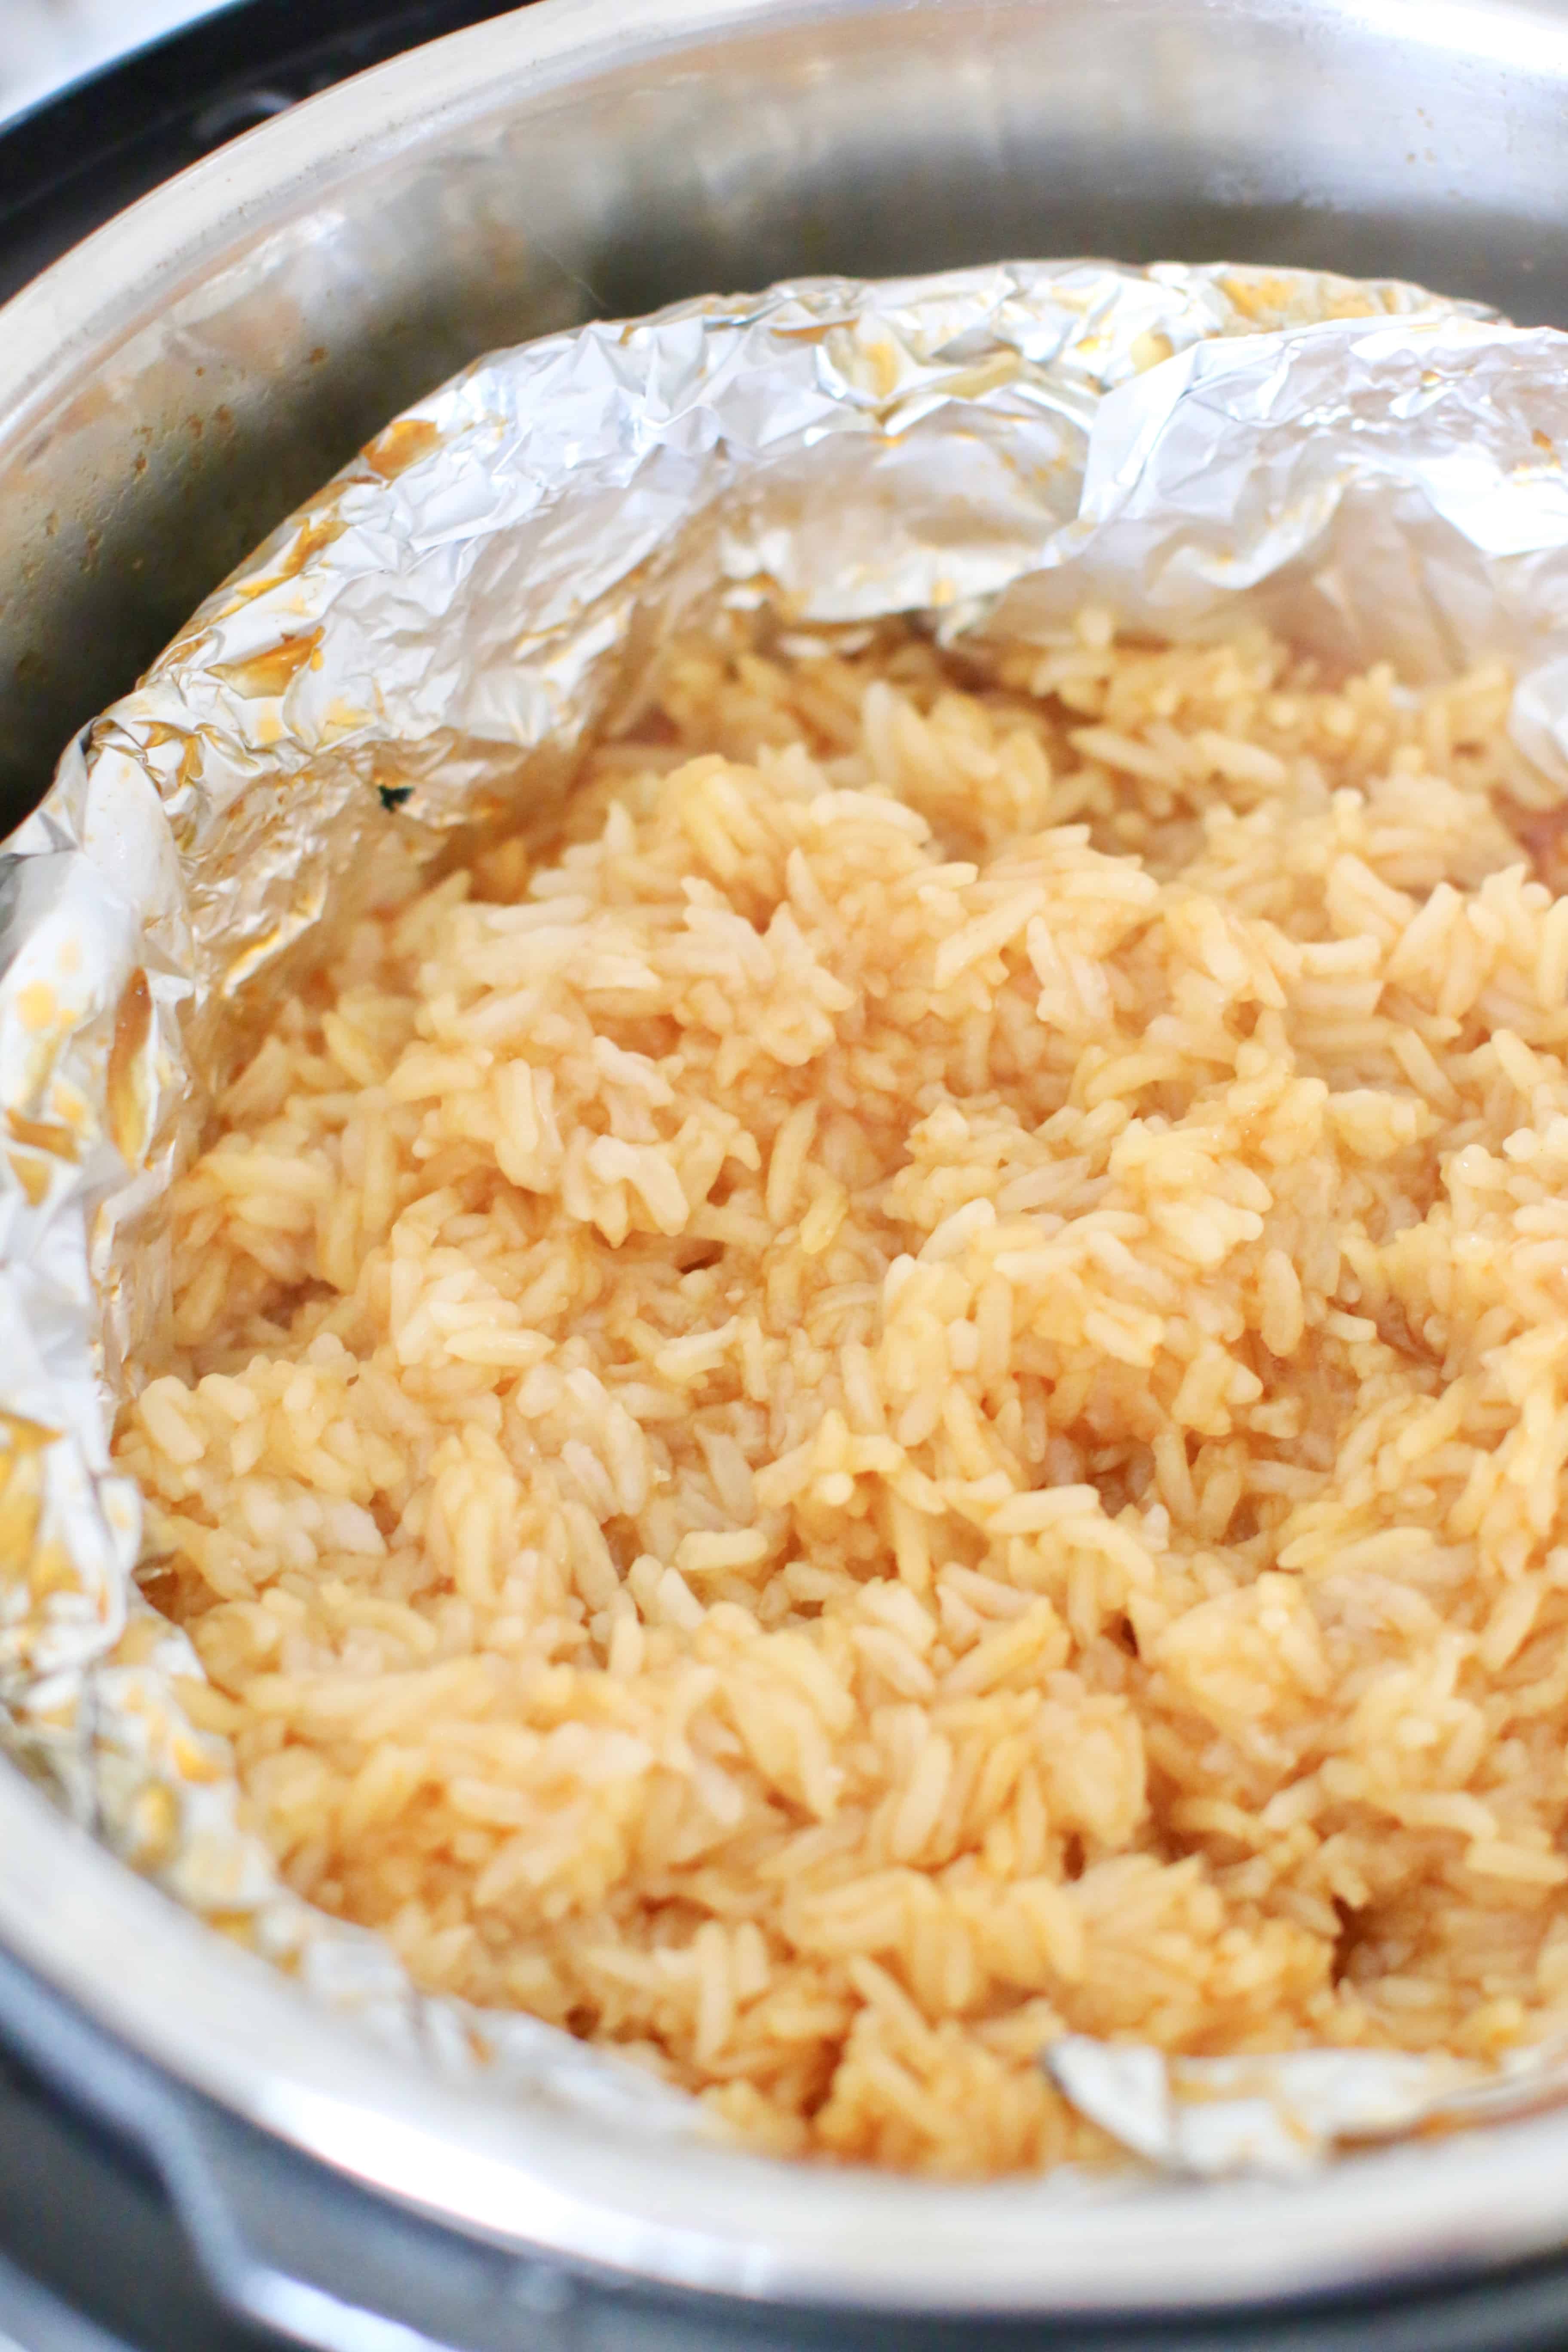 cooked, Instant Pot long grain rice shown in a baking pan.